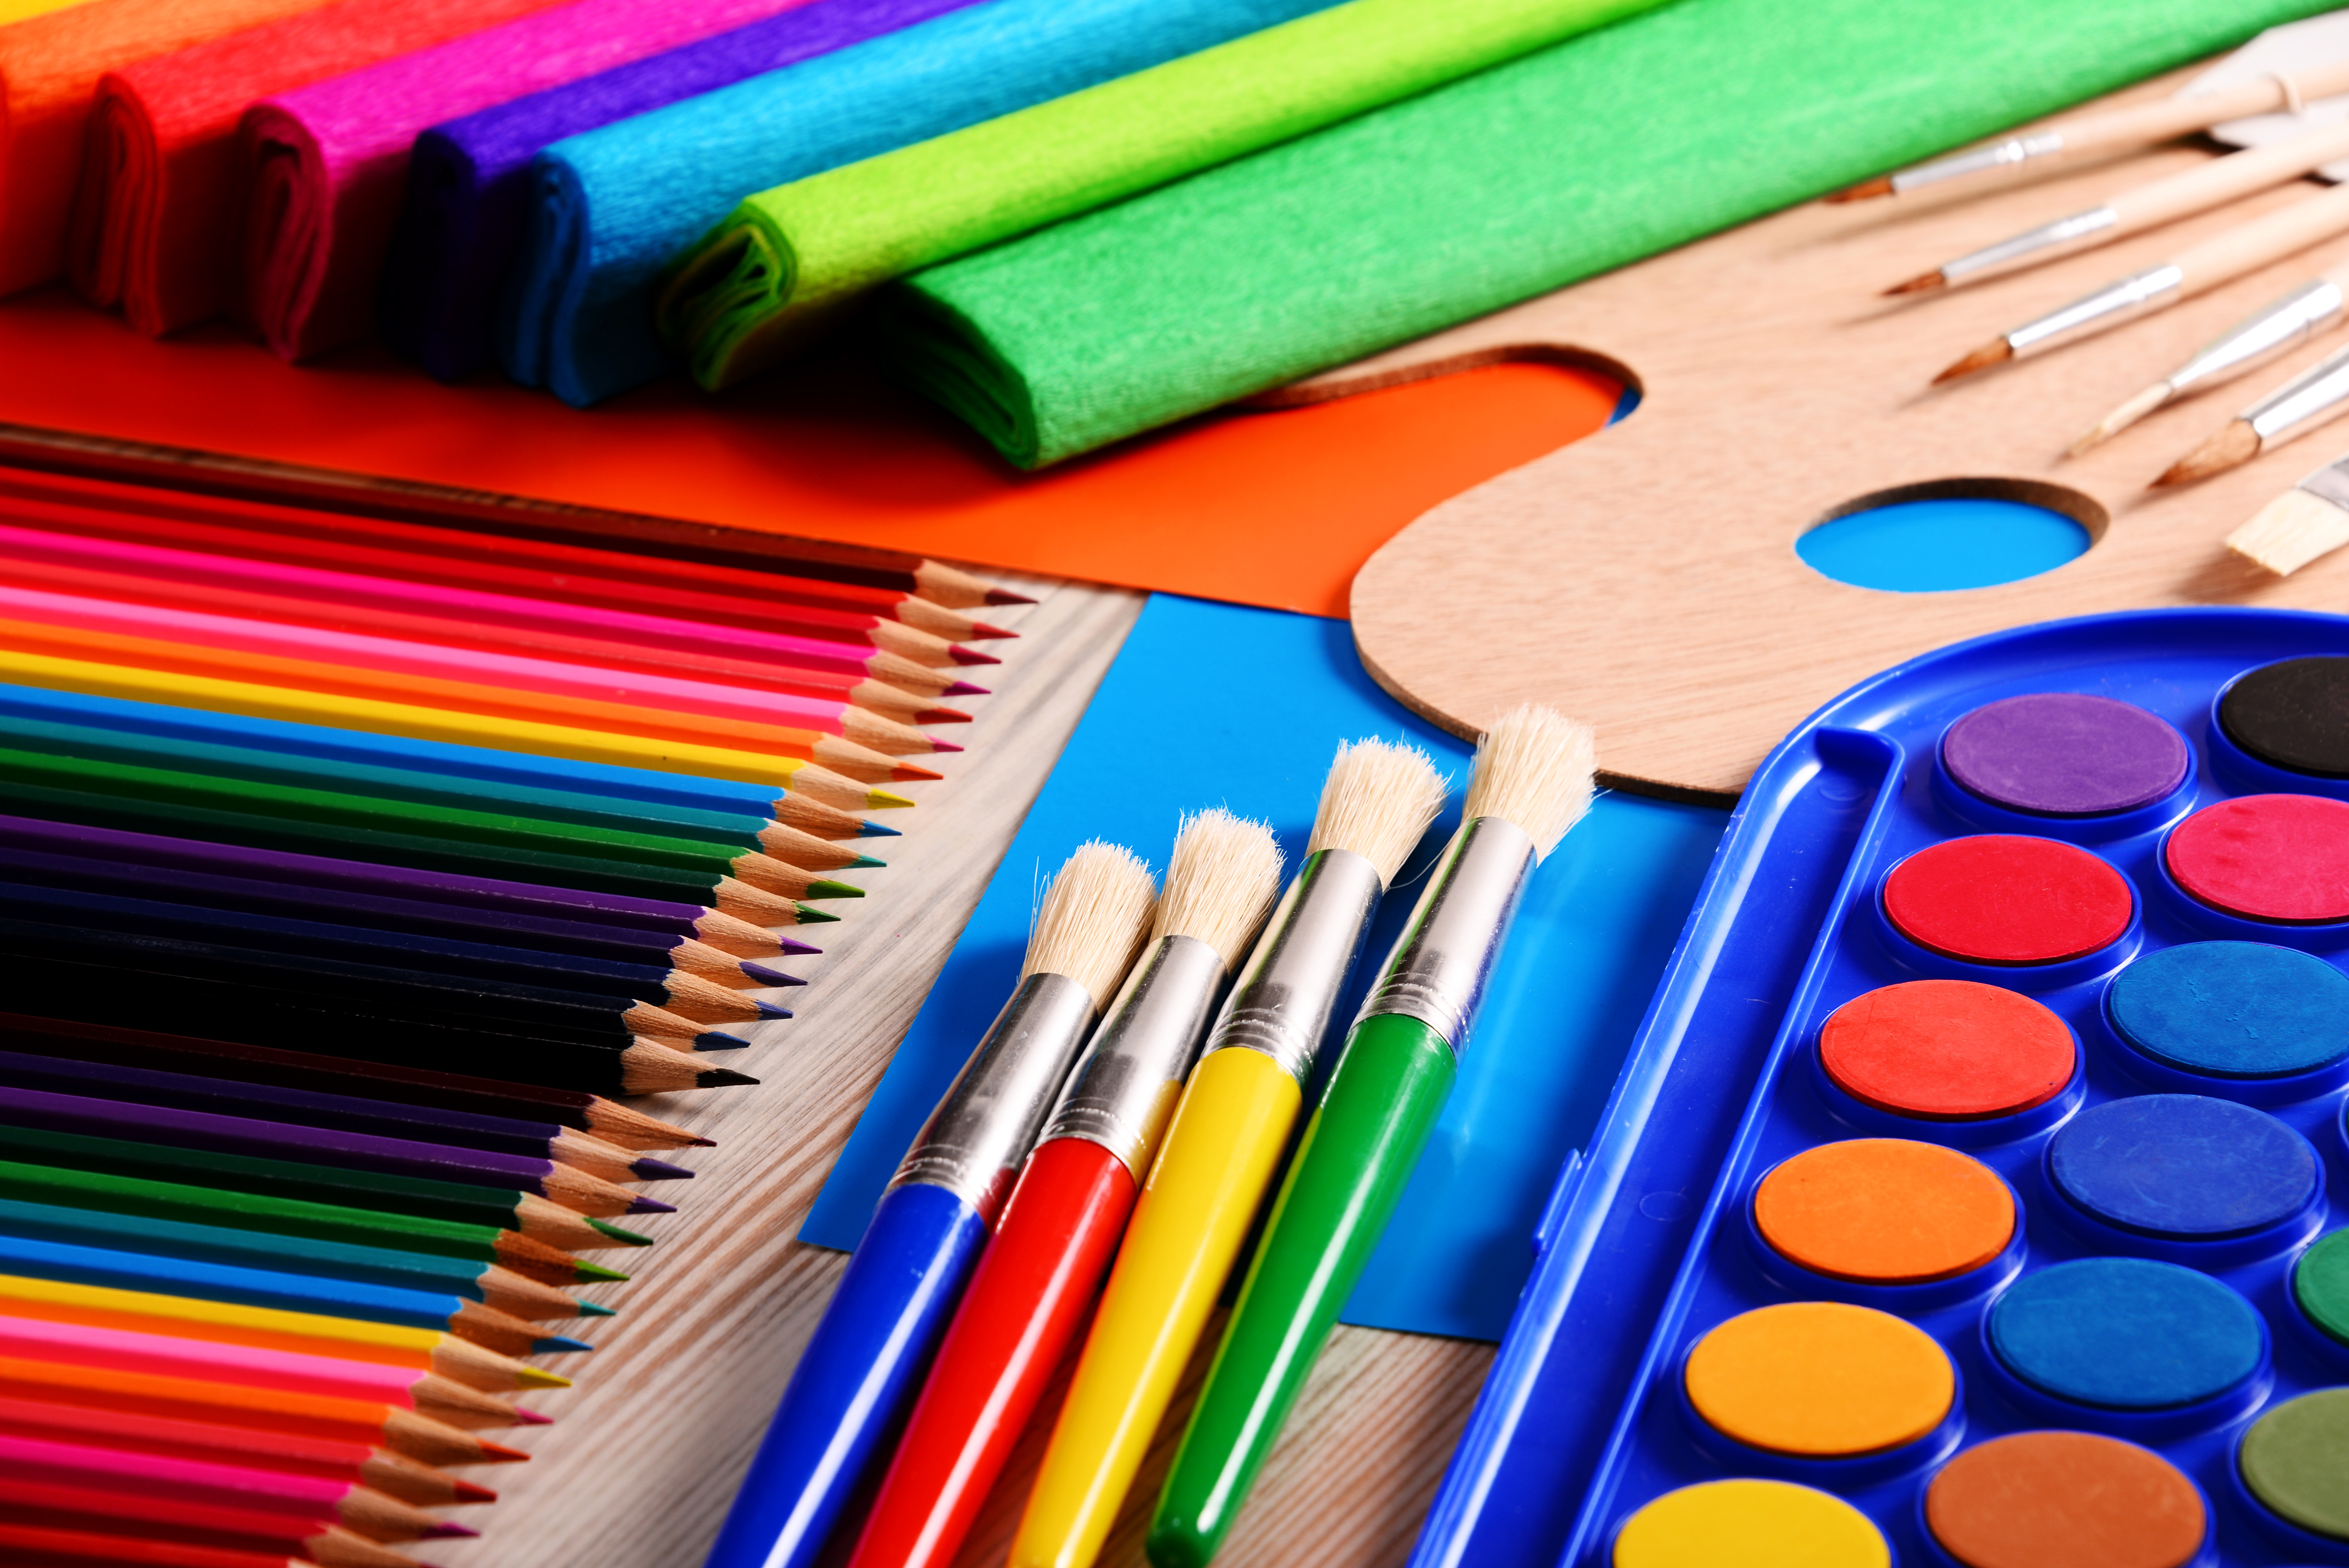 brush, photography, colors, colorful, pencil